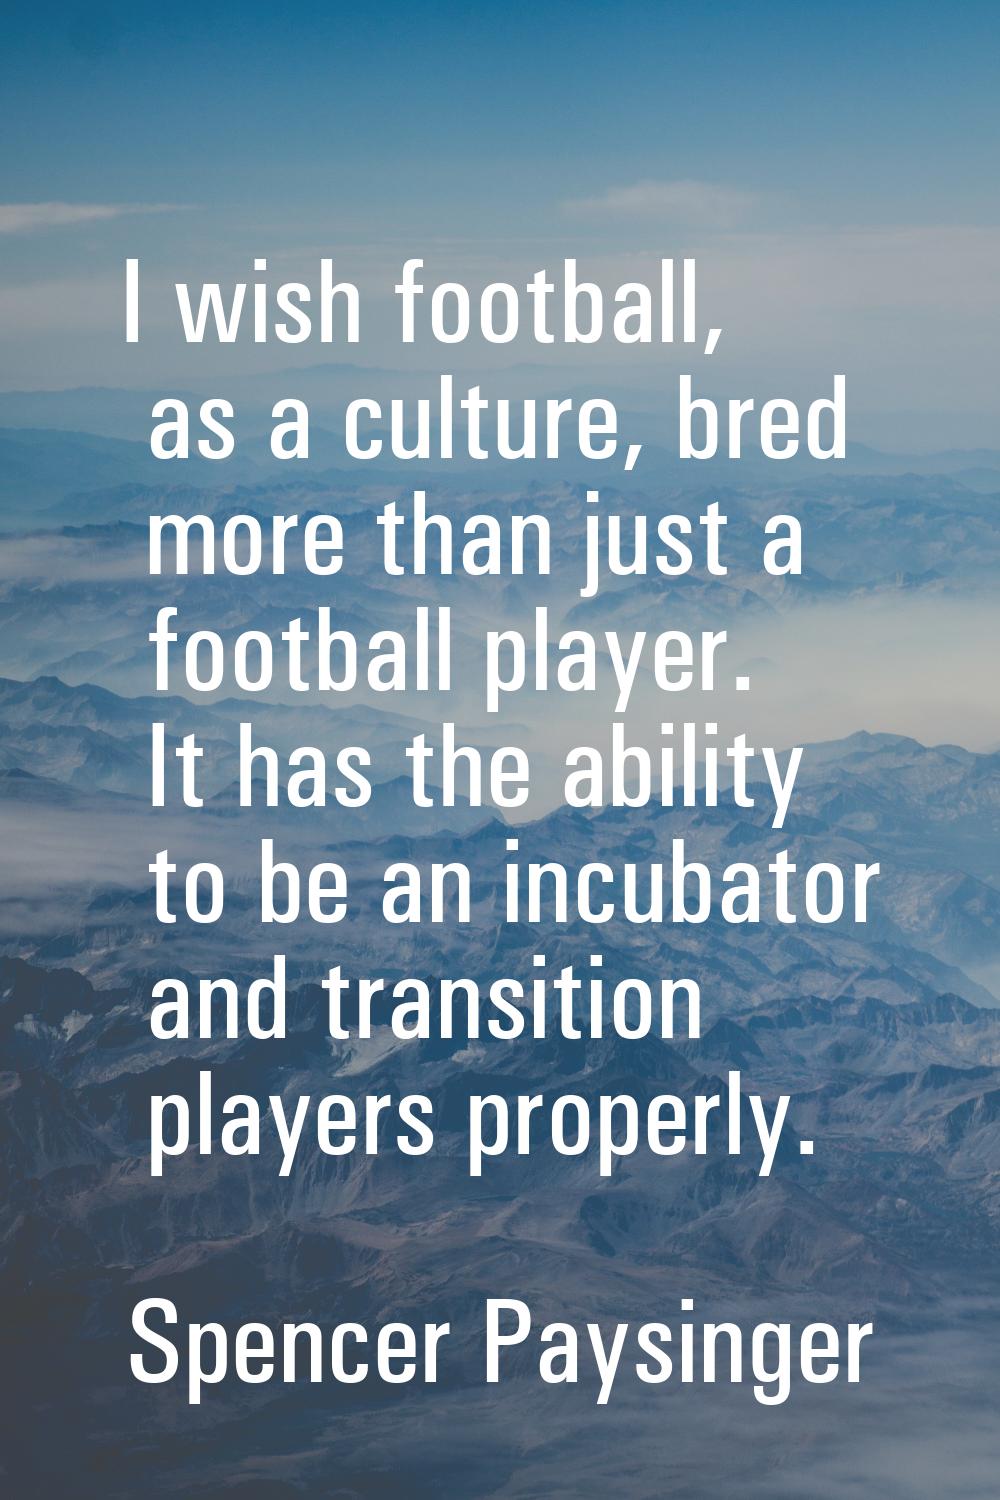 I wish football, as a culture, bred more than just a football player. It has the ability to be an i